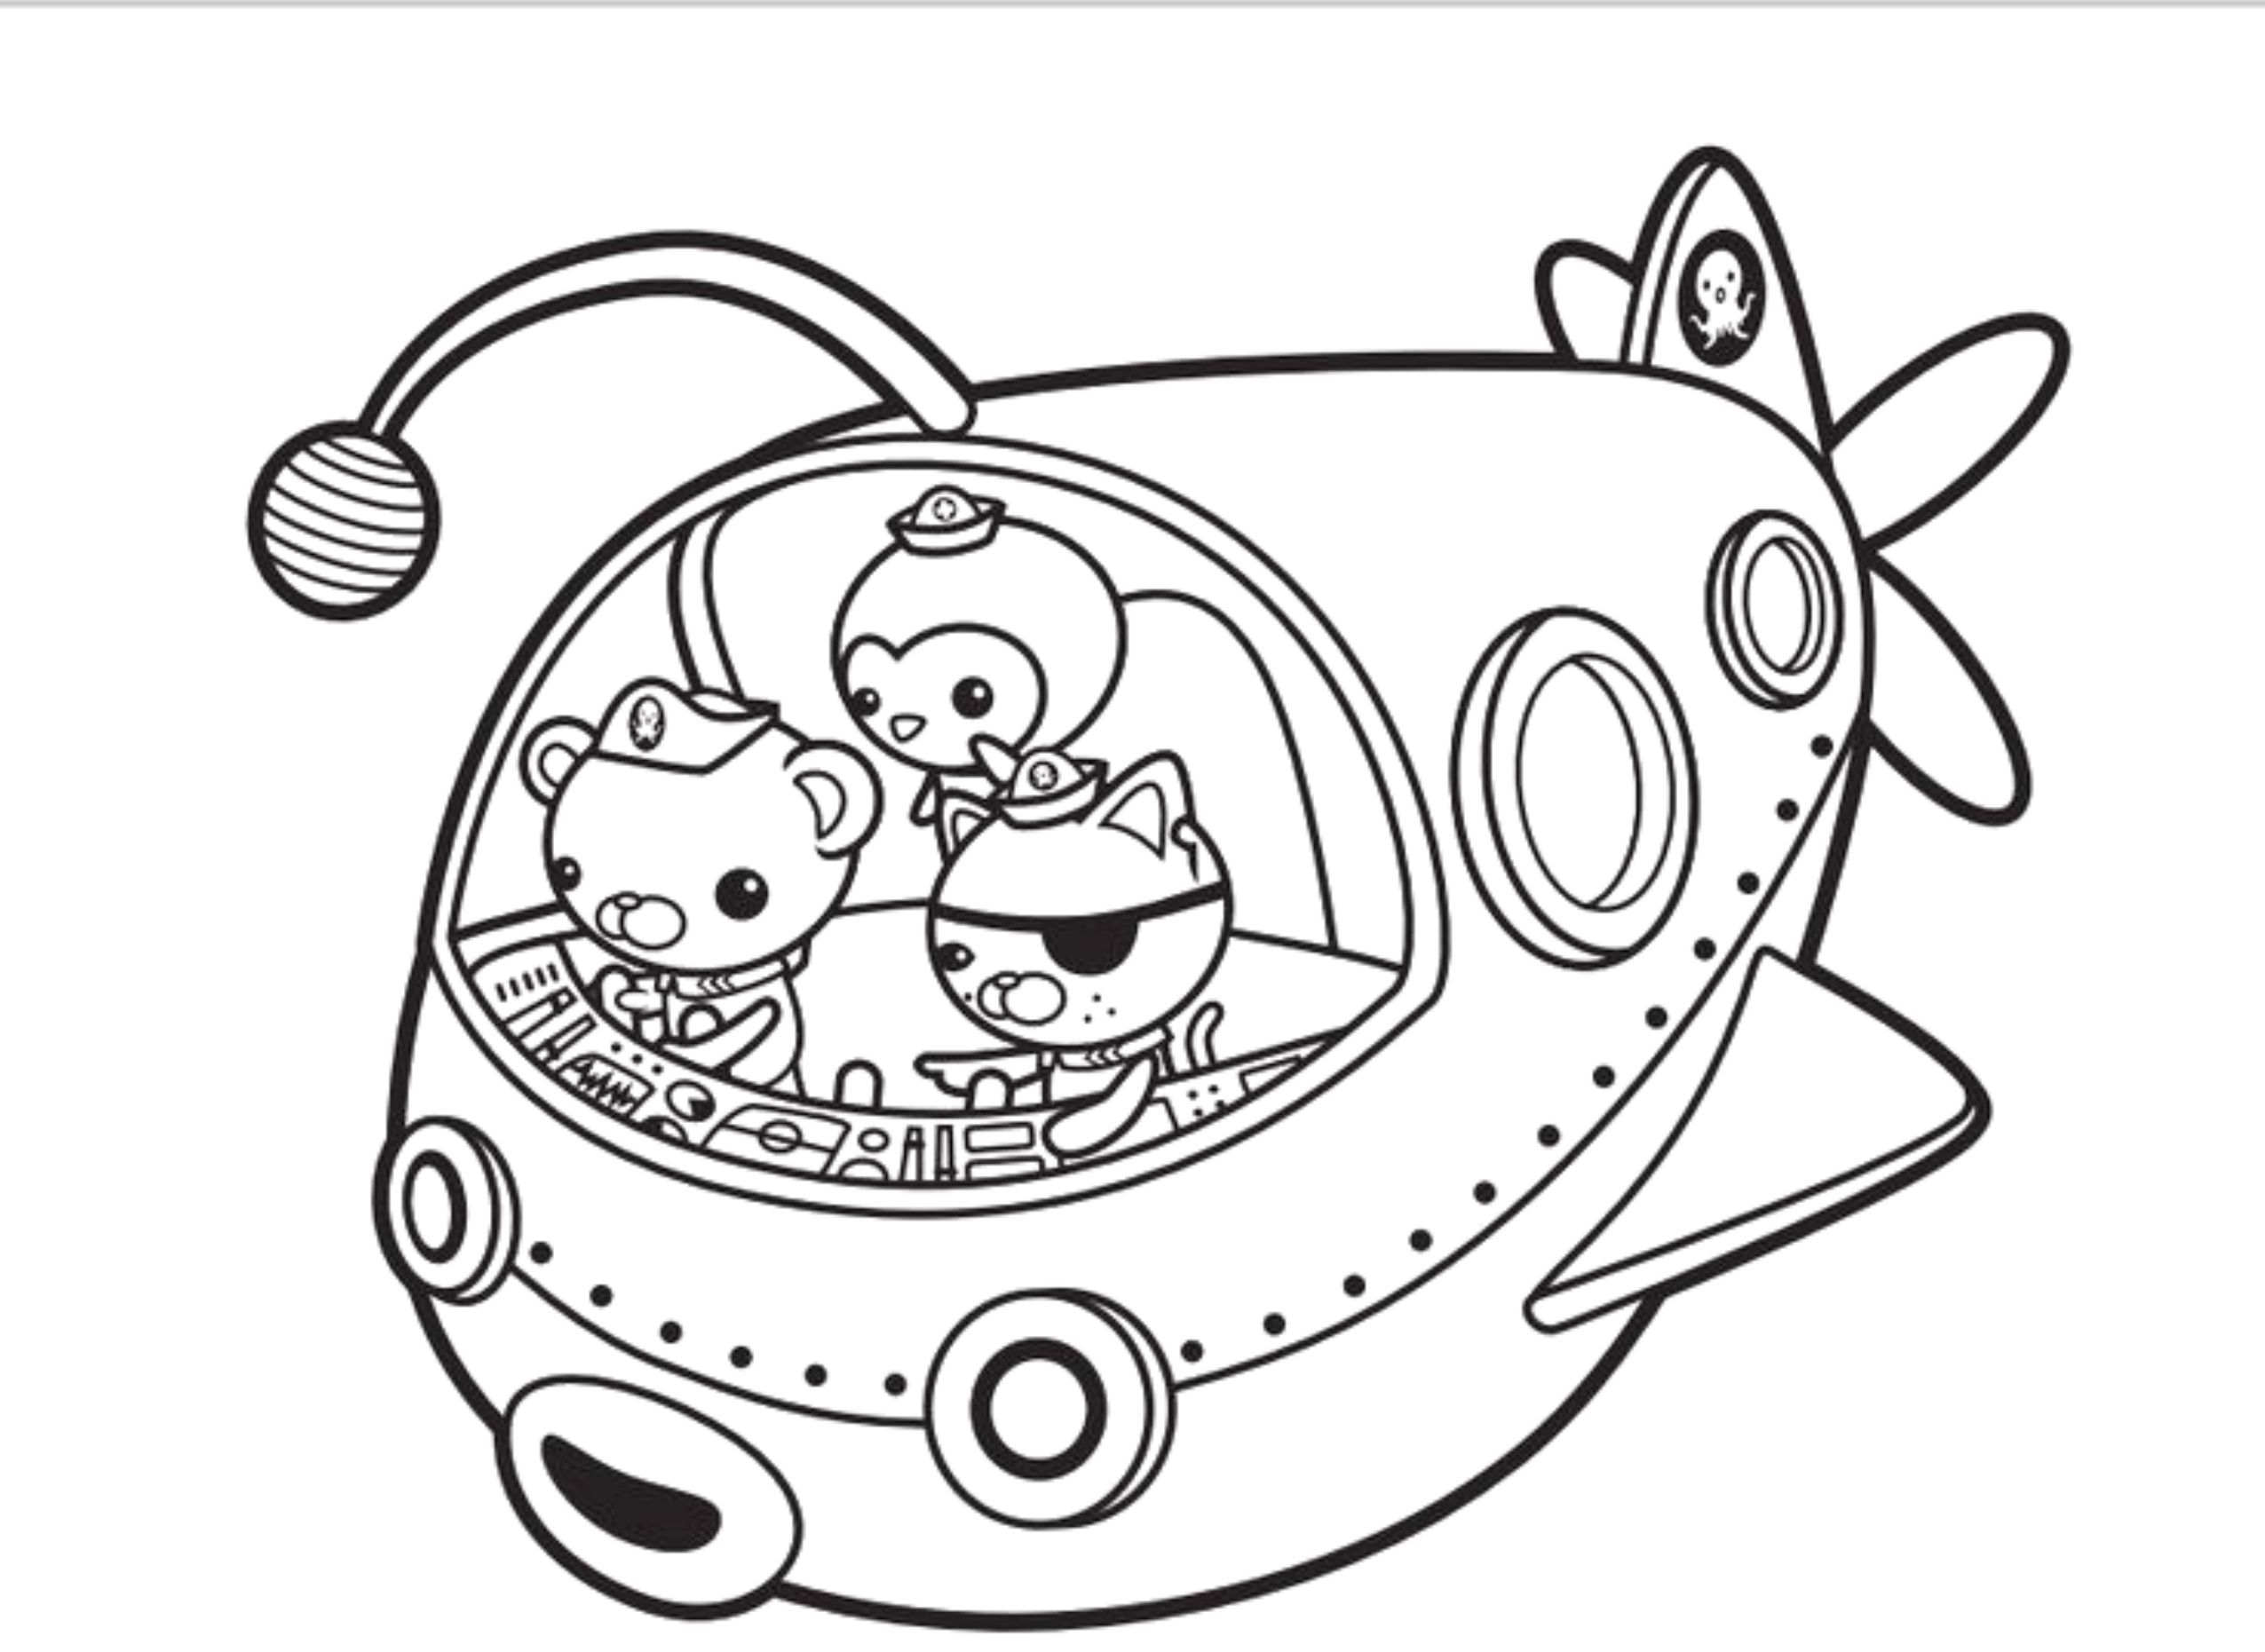 Print Download Octonauts Coloring Pages For Your Kid s Activity